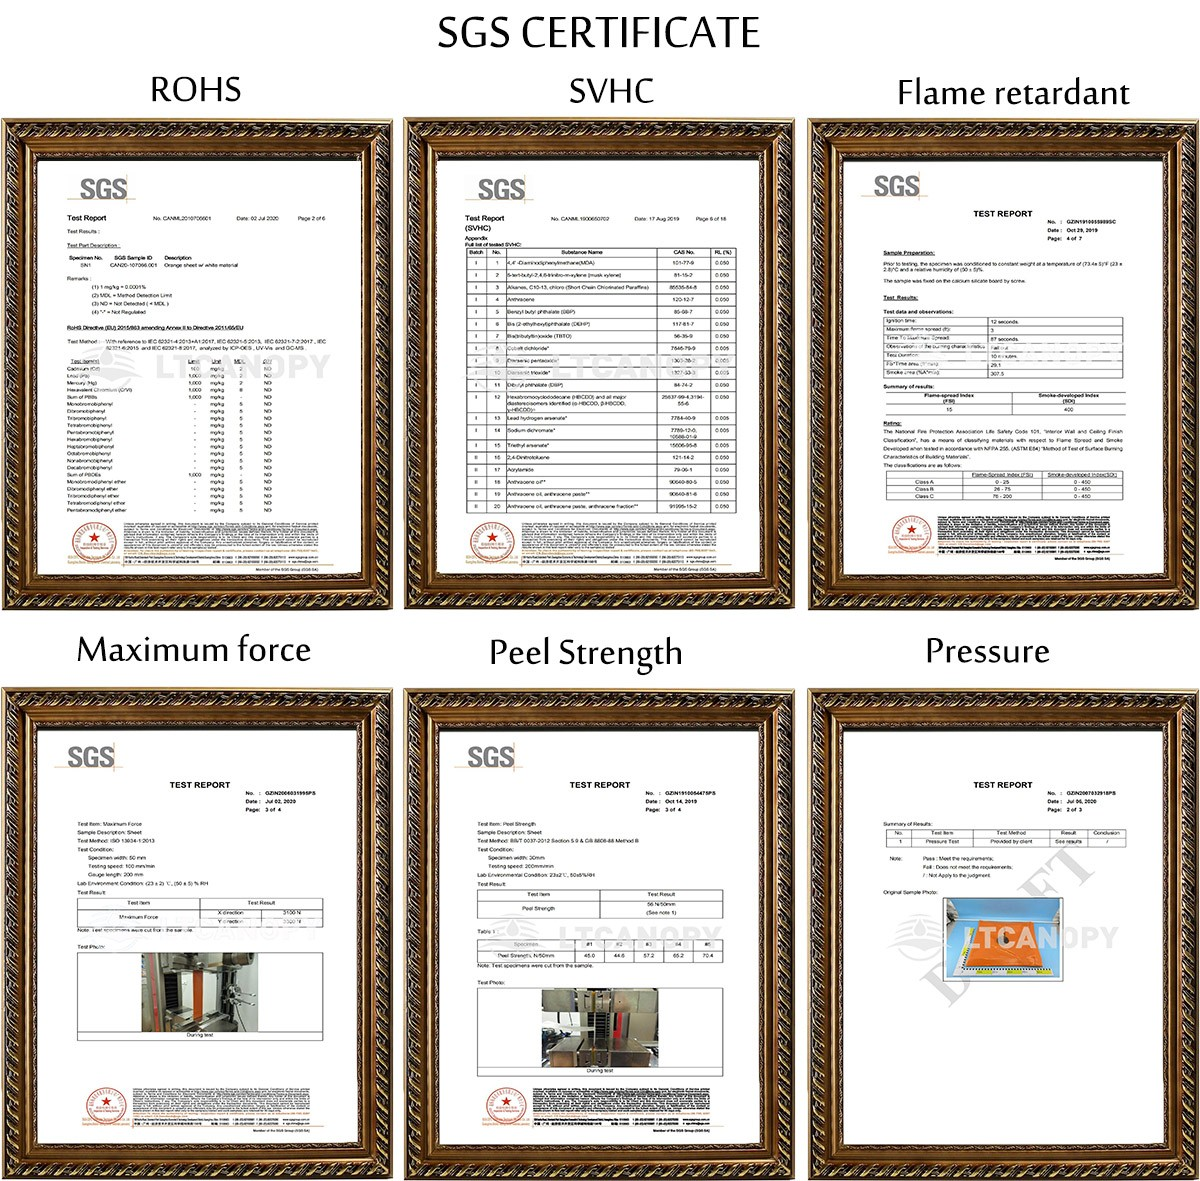 SGS CERTIFICATE for PVC flexible air duct hose in HAVC system